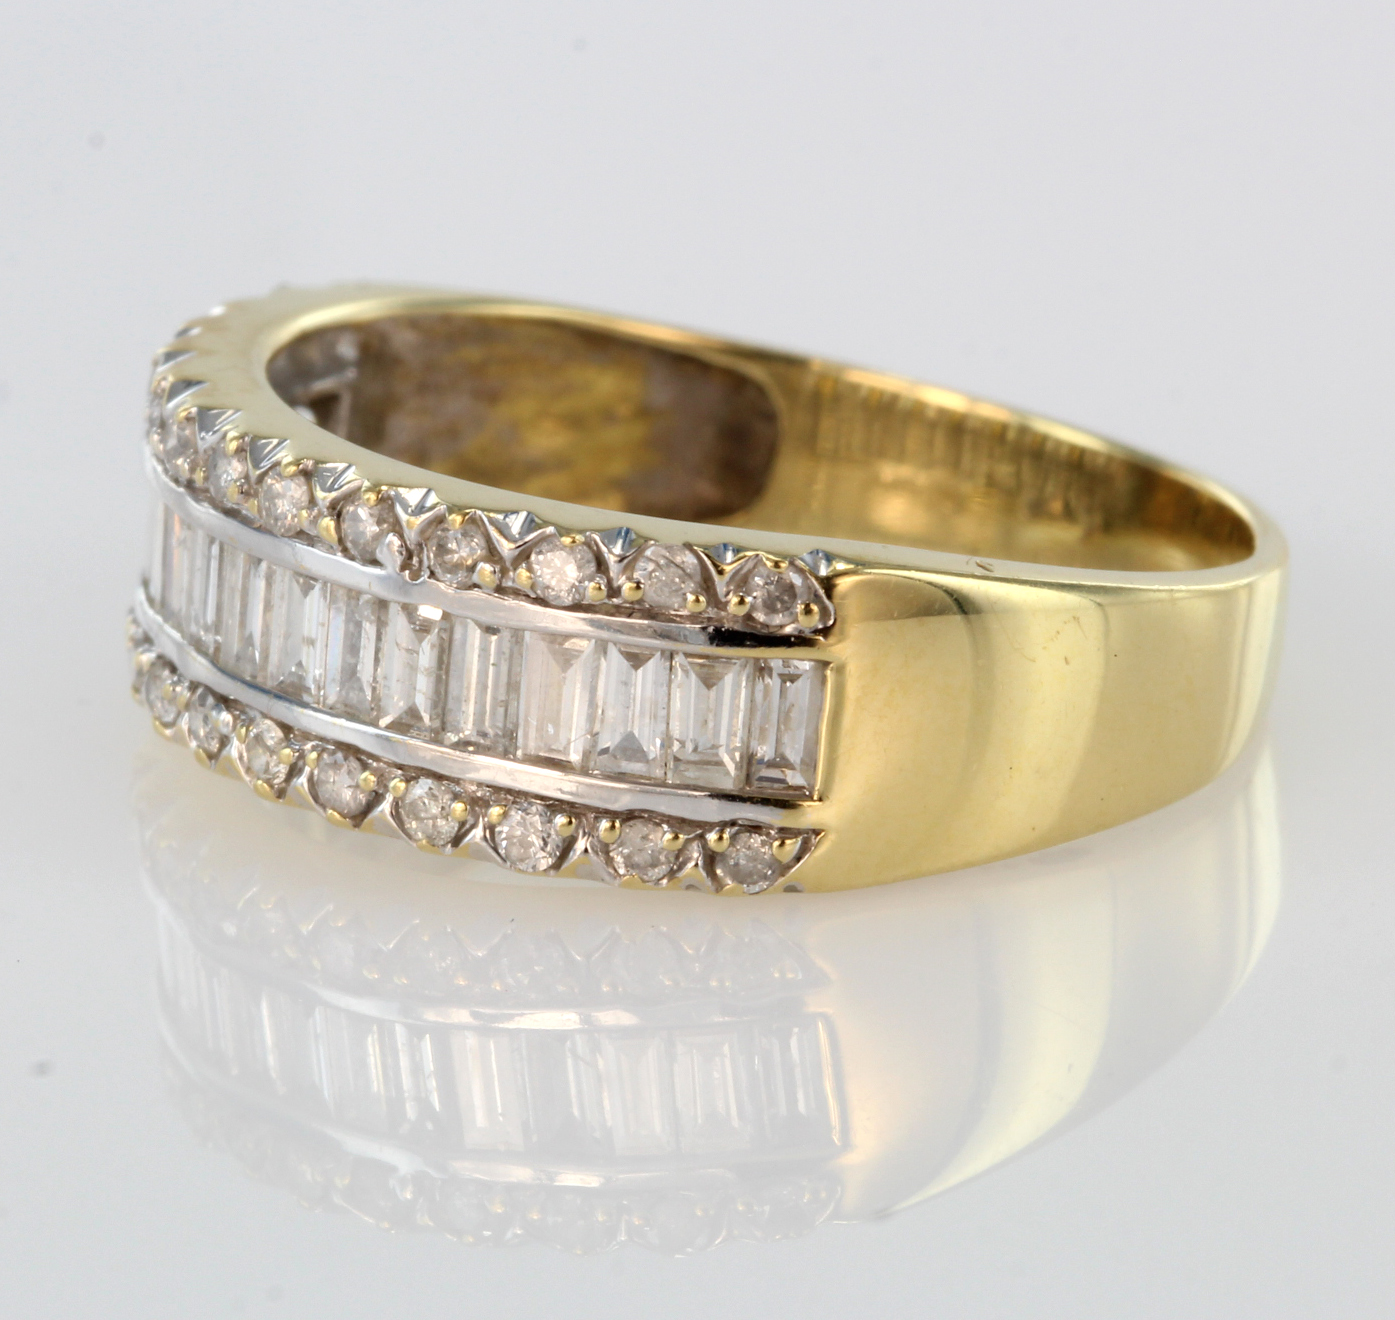 18ct yellow gold band ring set with row of baguette cut diamonds bordered by a row of round diamonds - Image 2 of 2